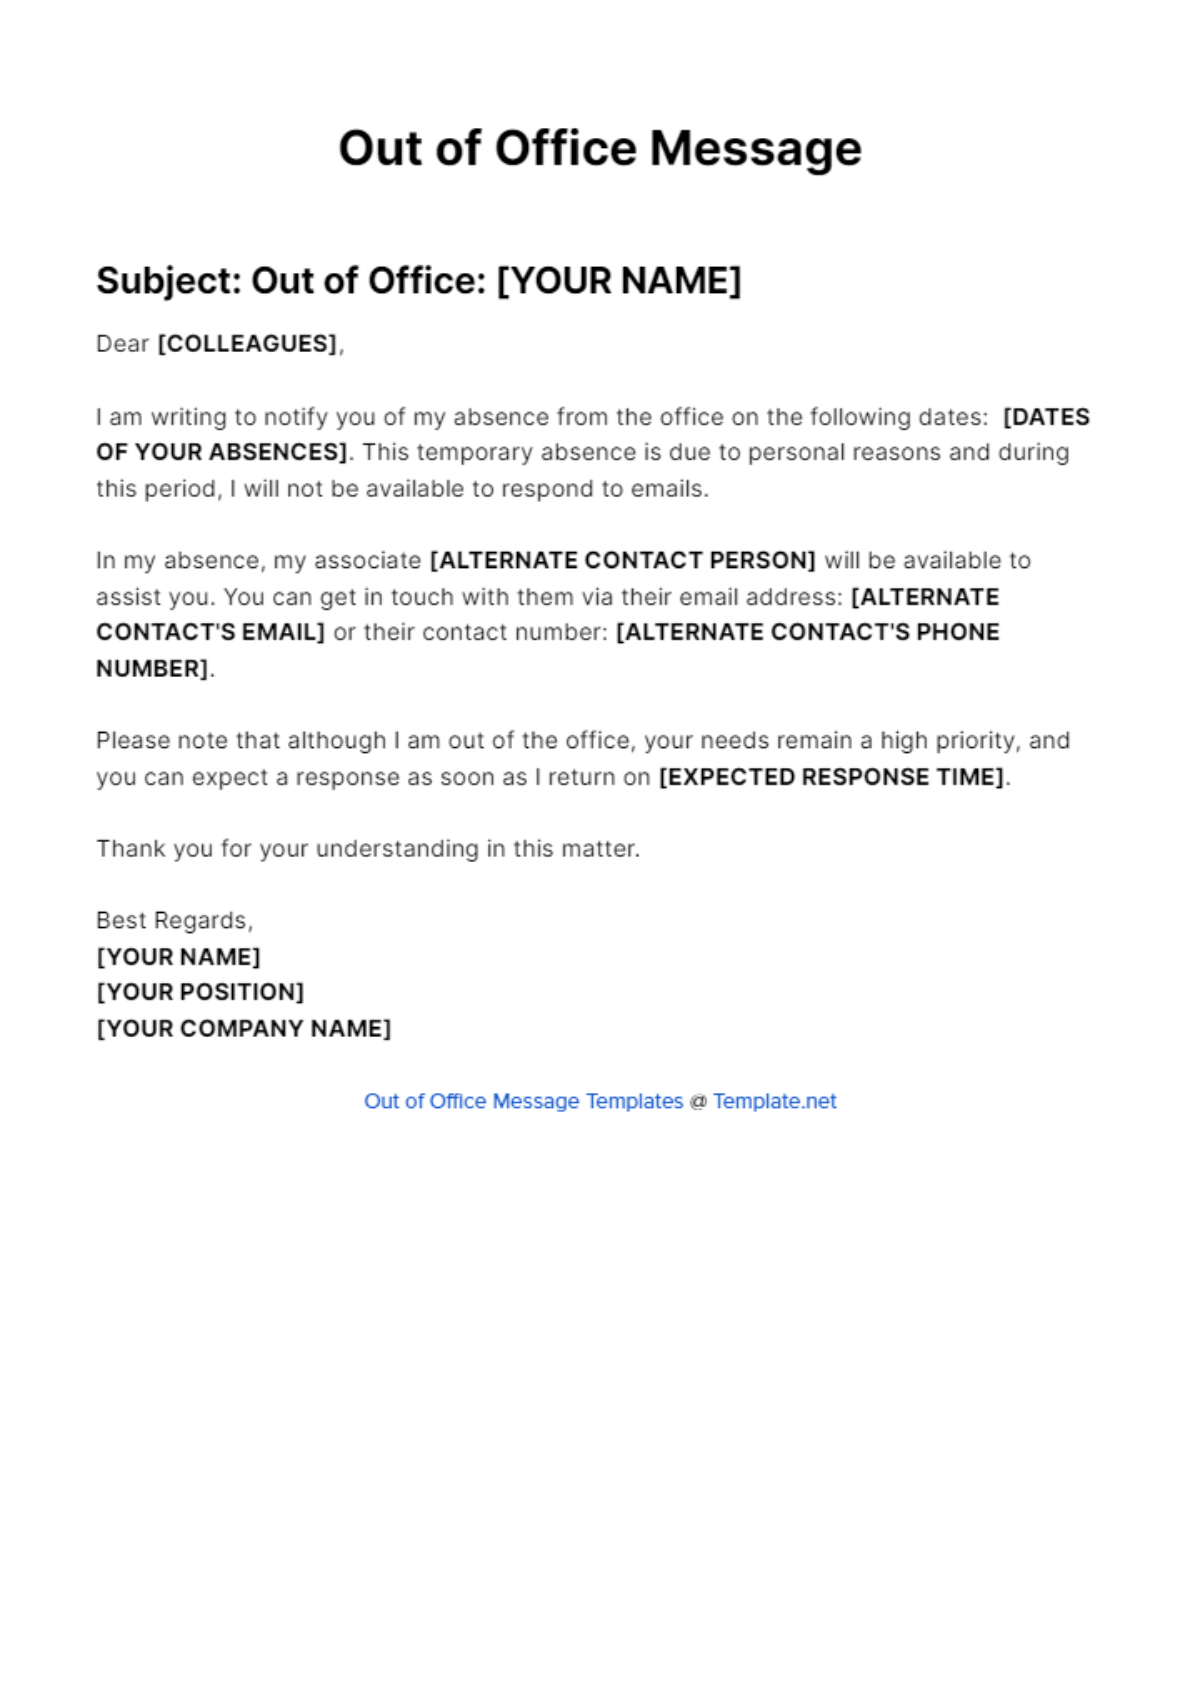 Working Offsite Out Of Office Message Template